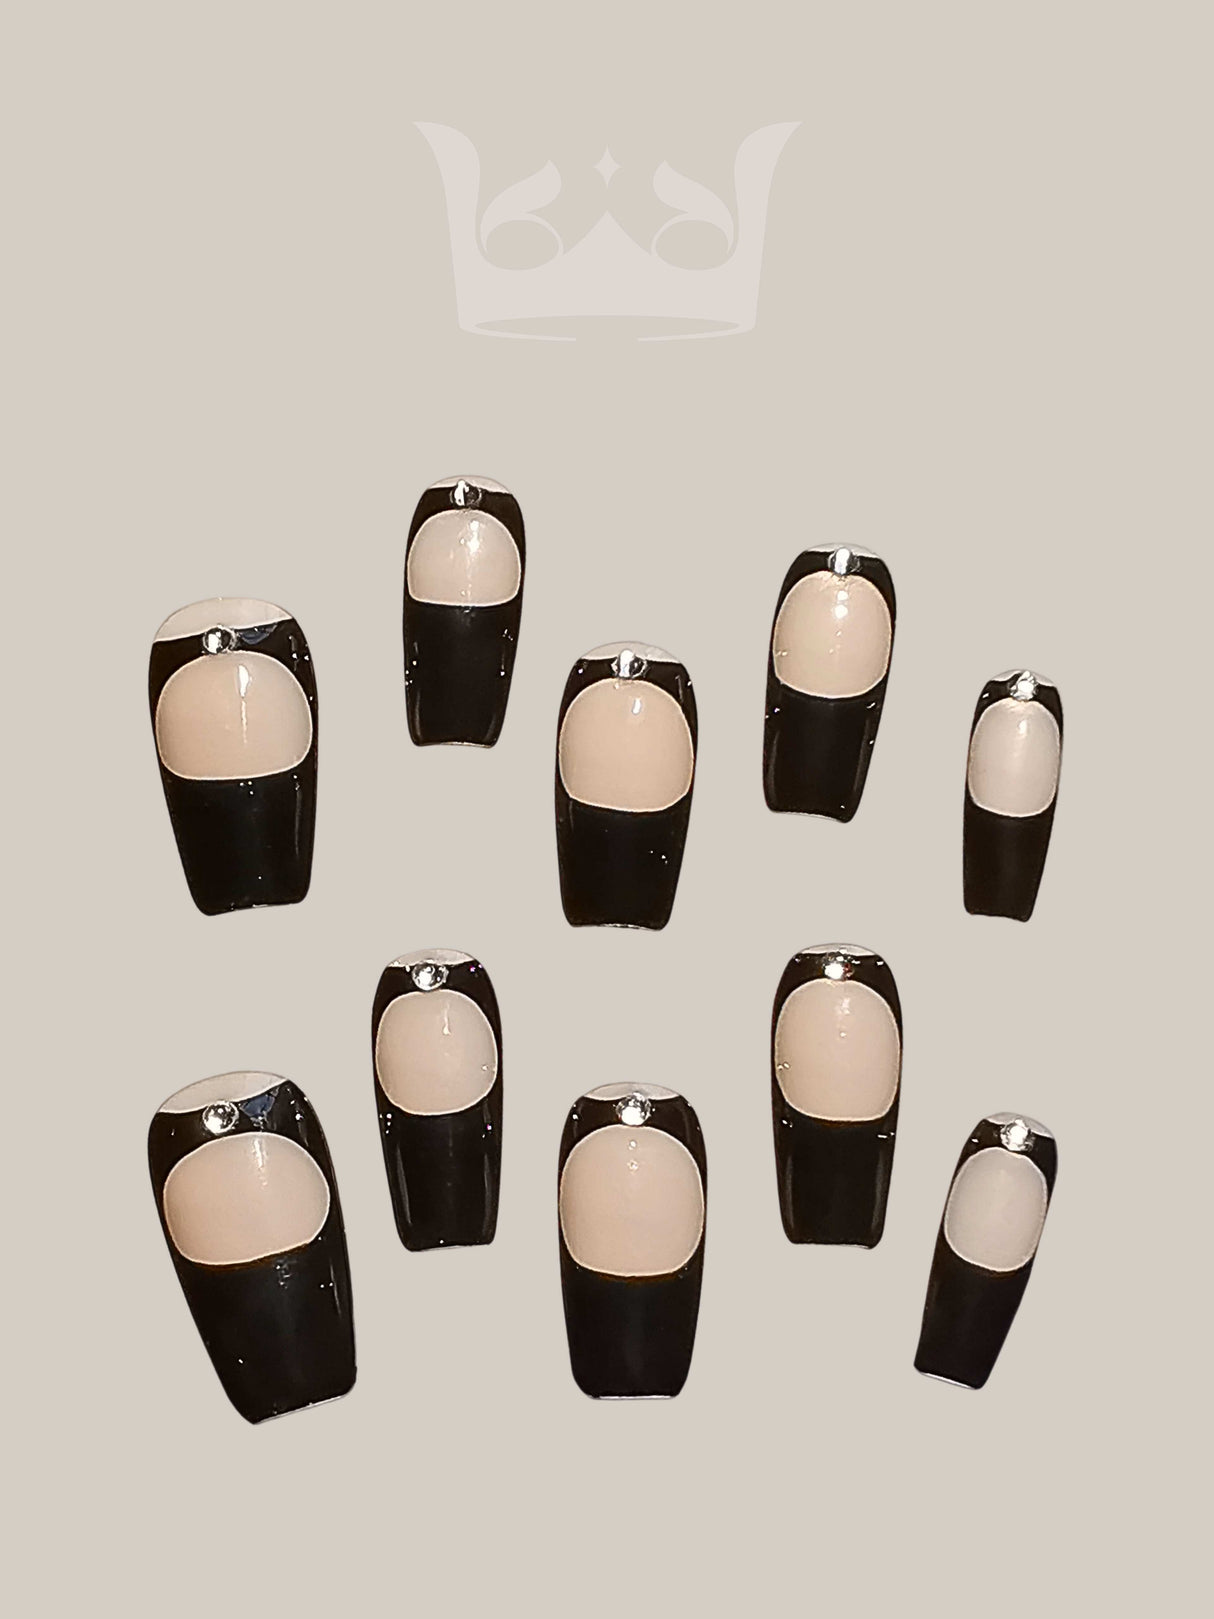 Stylish nails with a two-tone design, nude base color, black tip, and silver stud. Available in coffin or ballerina style for a modern and edgy look.